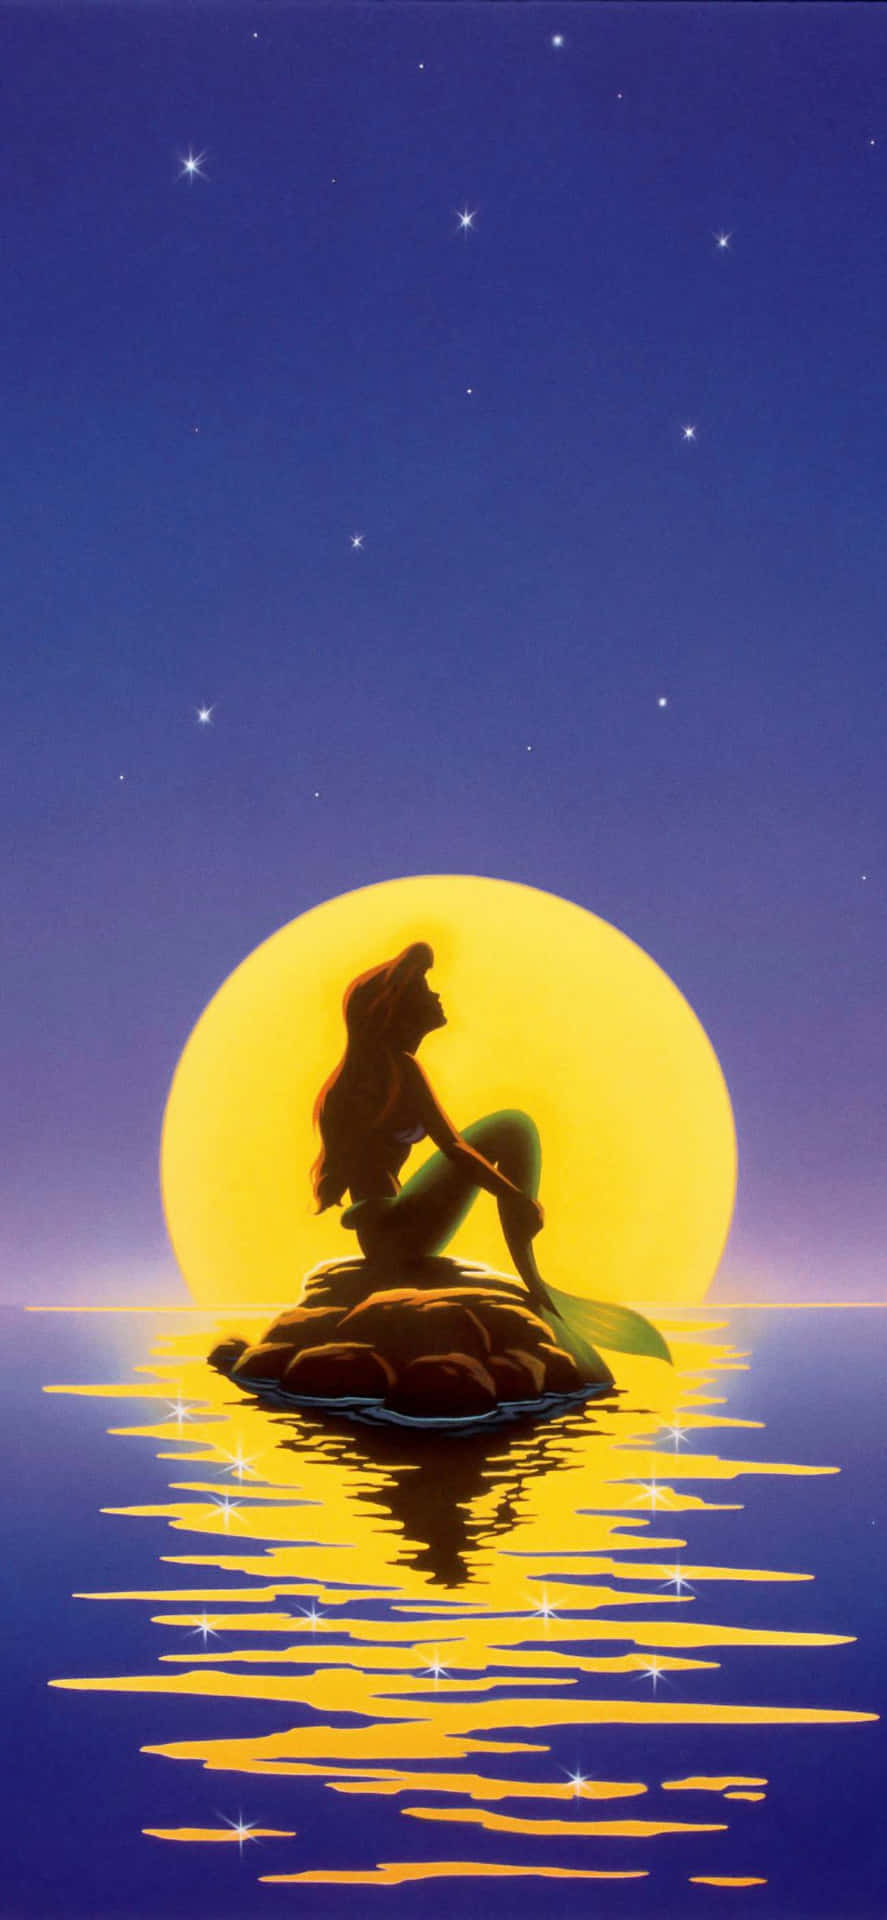 Ariel, the Little Mermaid, admiring her reflection in the water. Wallpaper